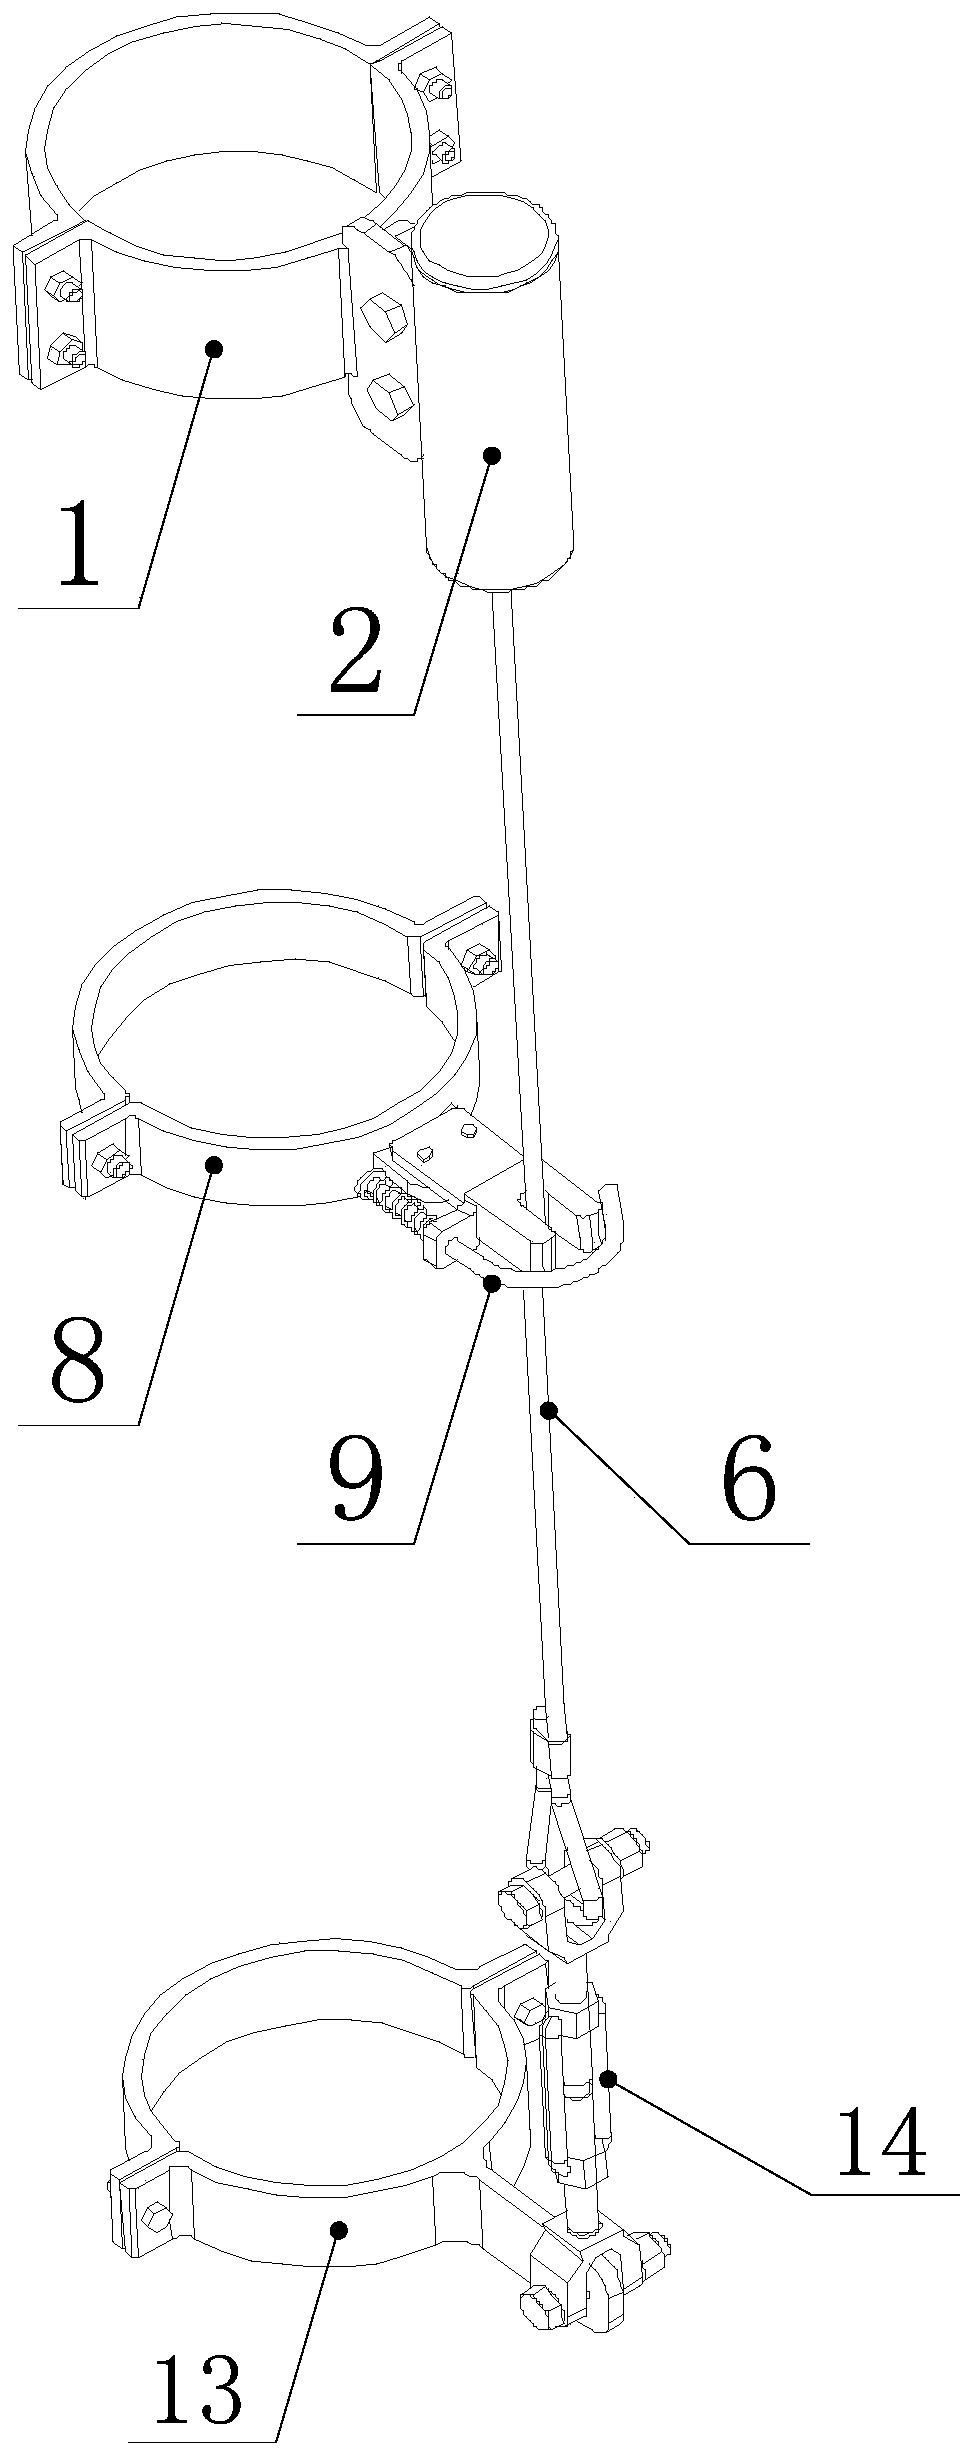 High-altitude operation safety cable guide assembly and high-altitude operation safety cable guide system using cable guide assembly